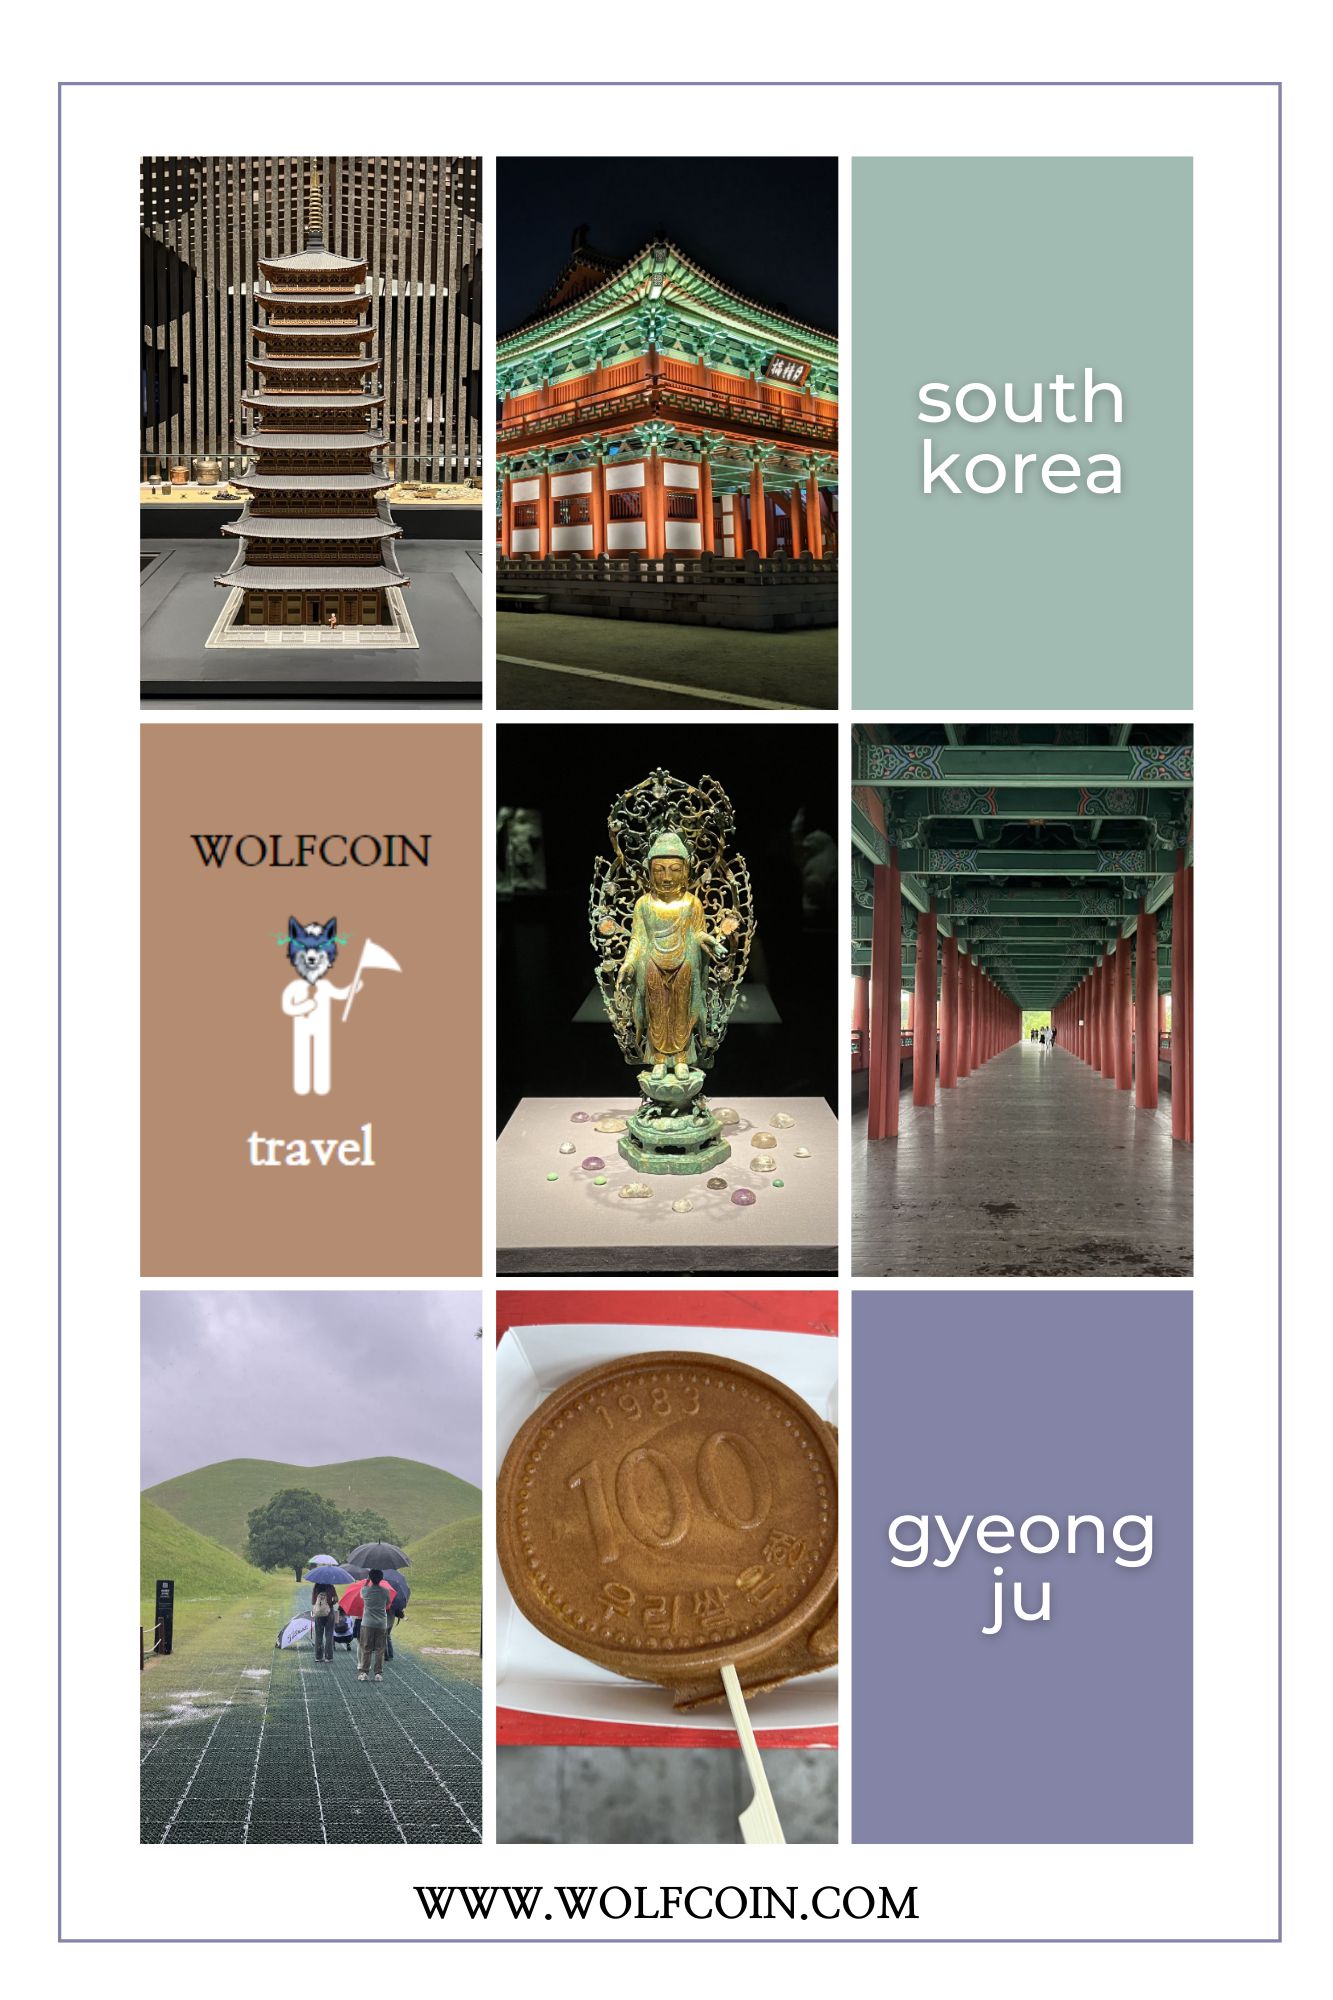 trip to kyeongju (wolfcoin).png.jpg